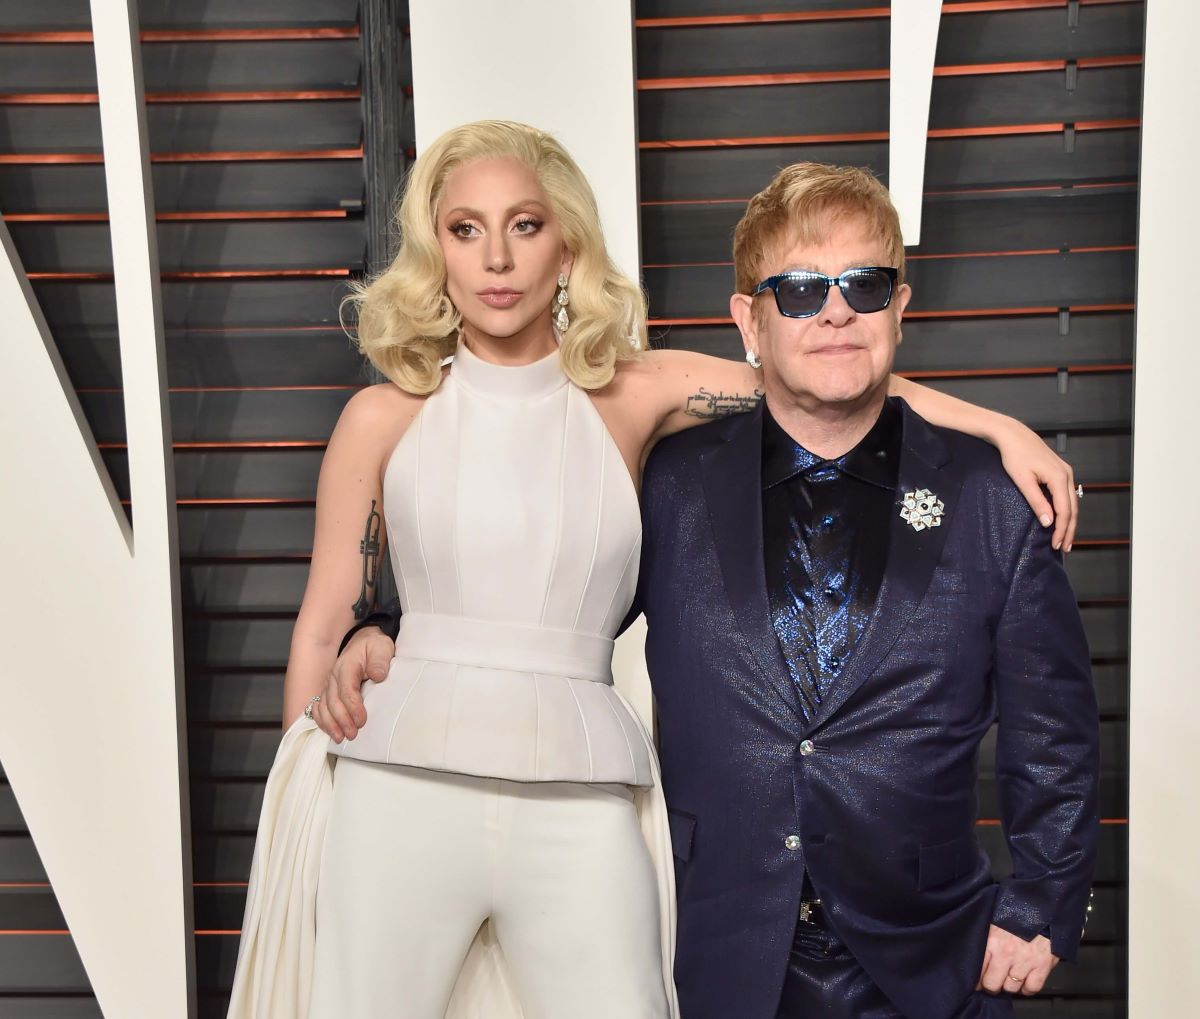 Lady Gaga wears white and stands with her arm around Elton John's shoulders. He wears a suit and sunglasses.